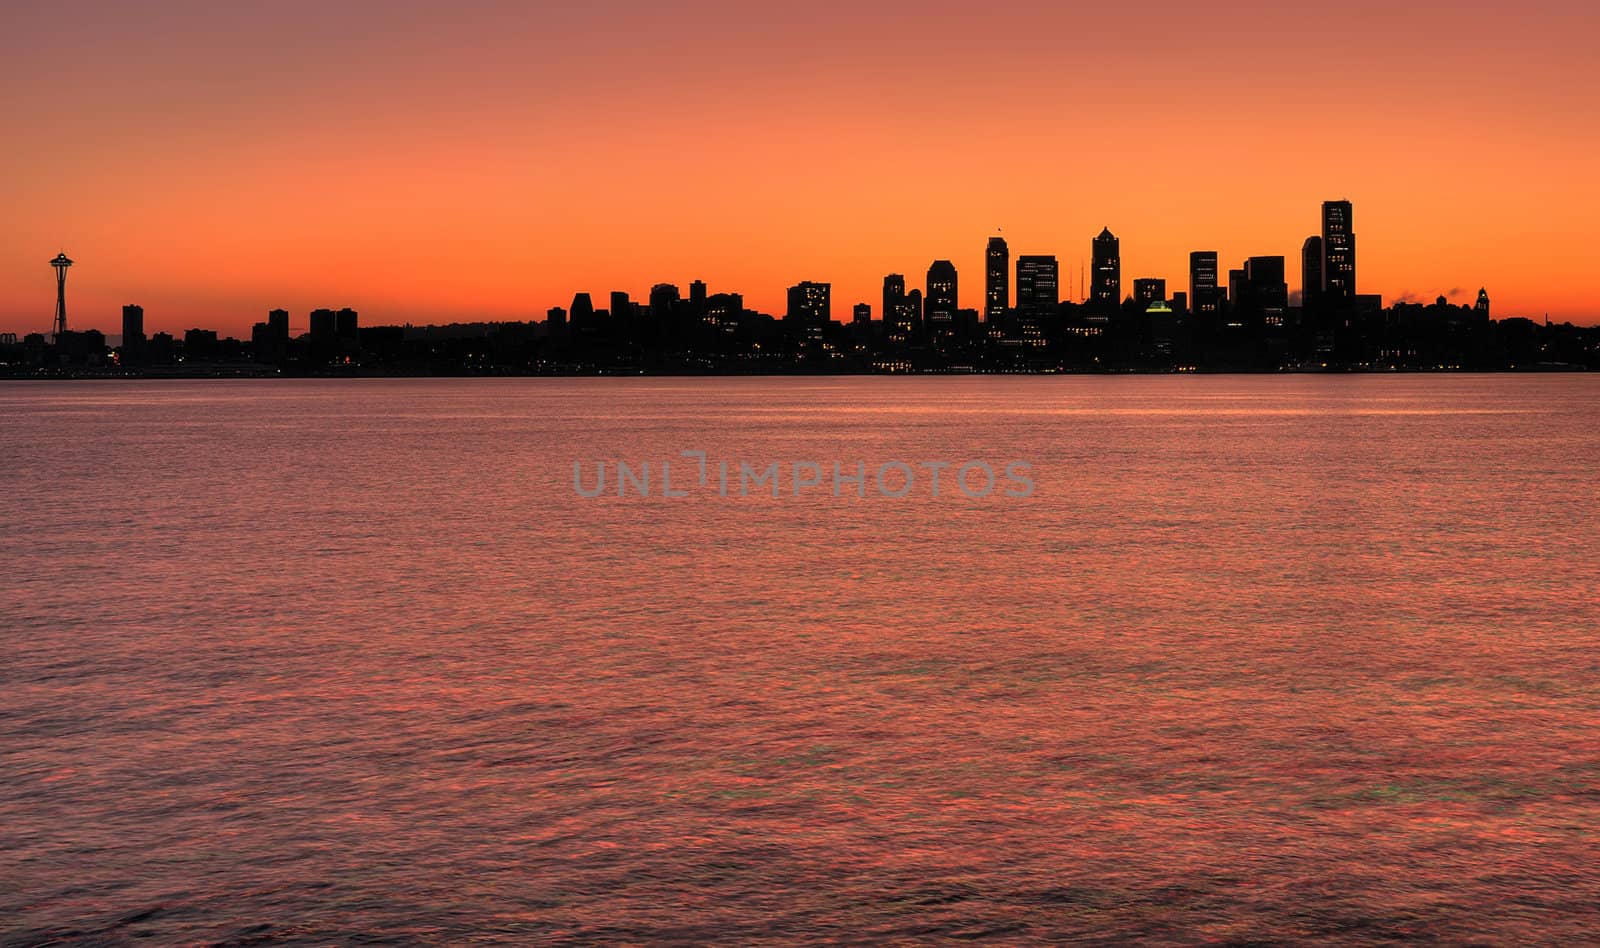 Seattle skyline at dawn by neelsky